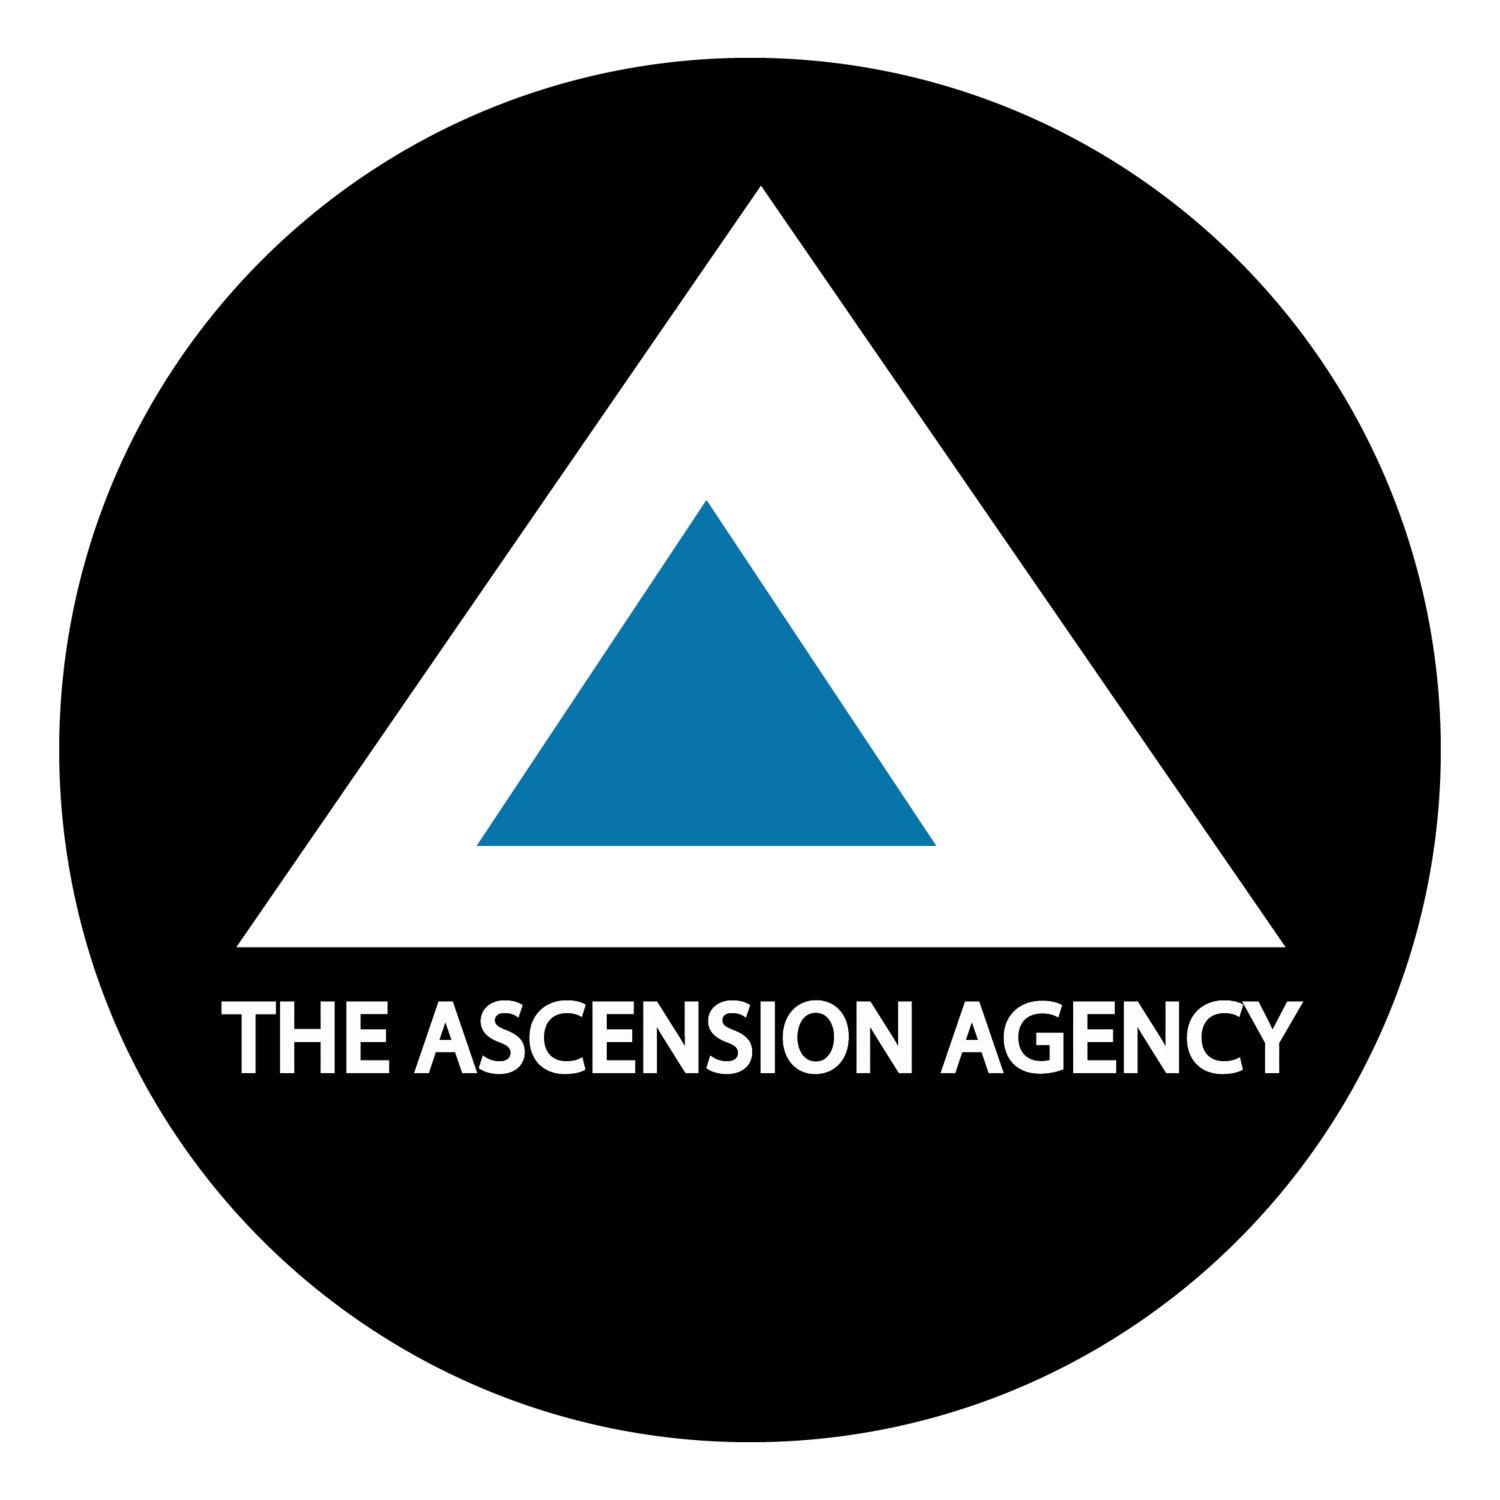 The Ascension Agency